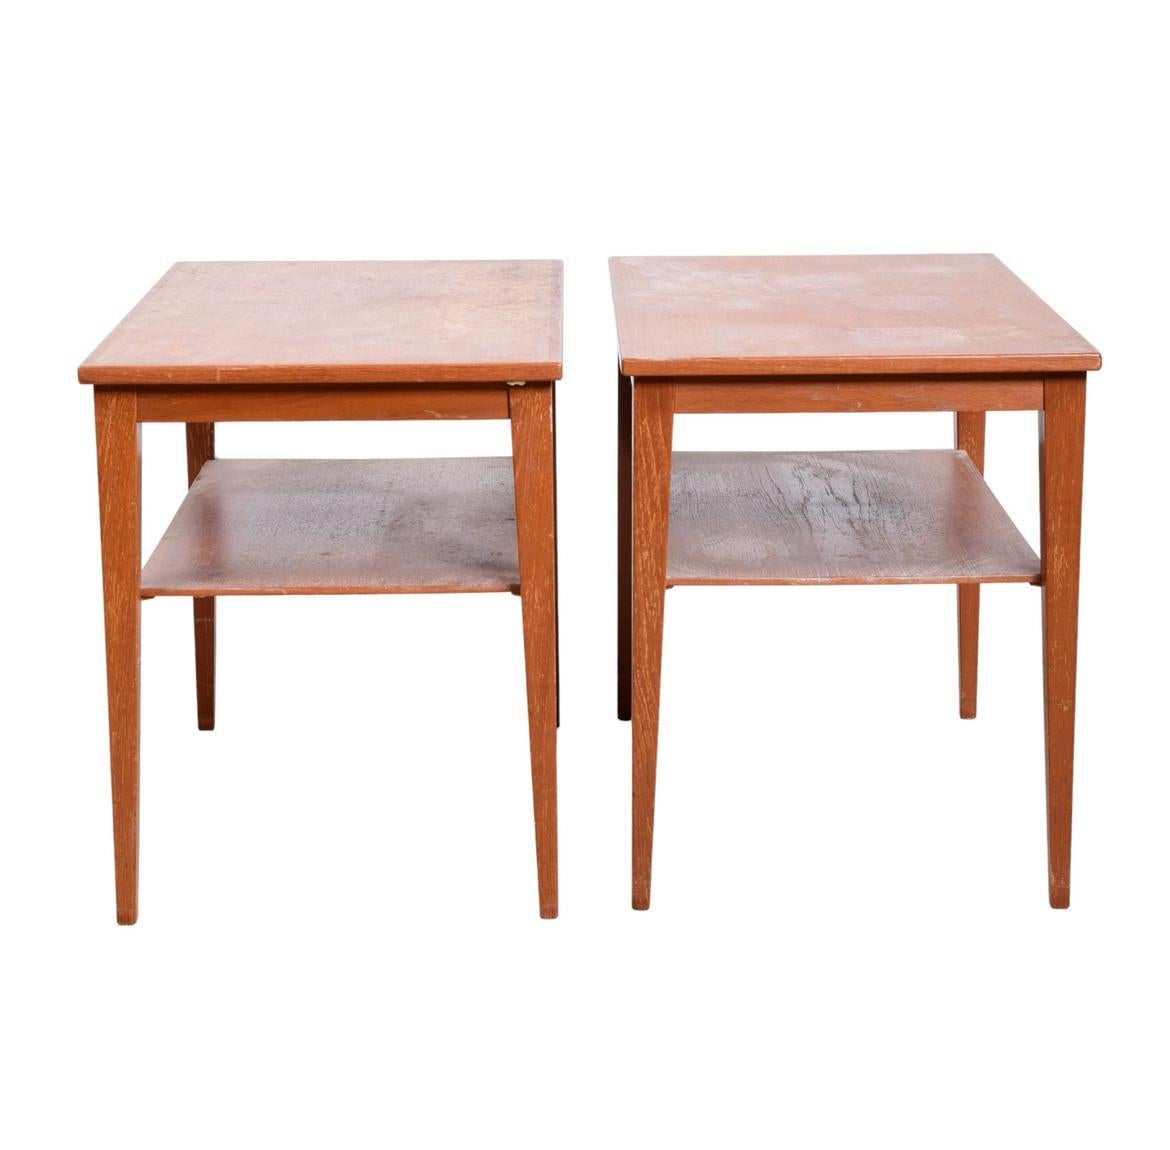 Pair of mid century danish modern by Thams Kvalitet Function Form Danish Modern 2-tier side tables, tapered legs with lower shelf. Can be used and end tables or nightstands. Good vintage condition. Located in Brooklyn NYC.

Each table Measures 21